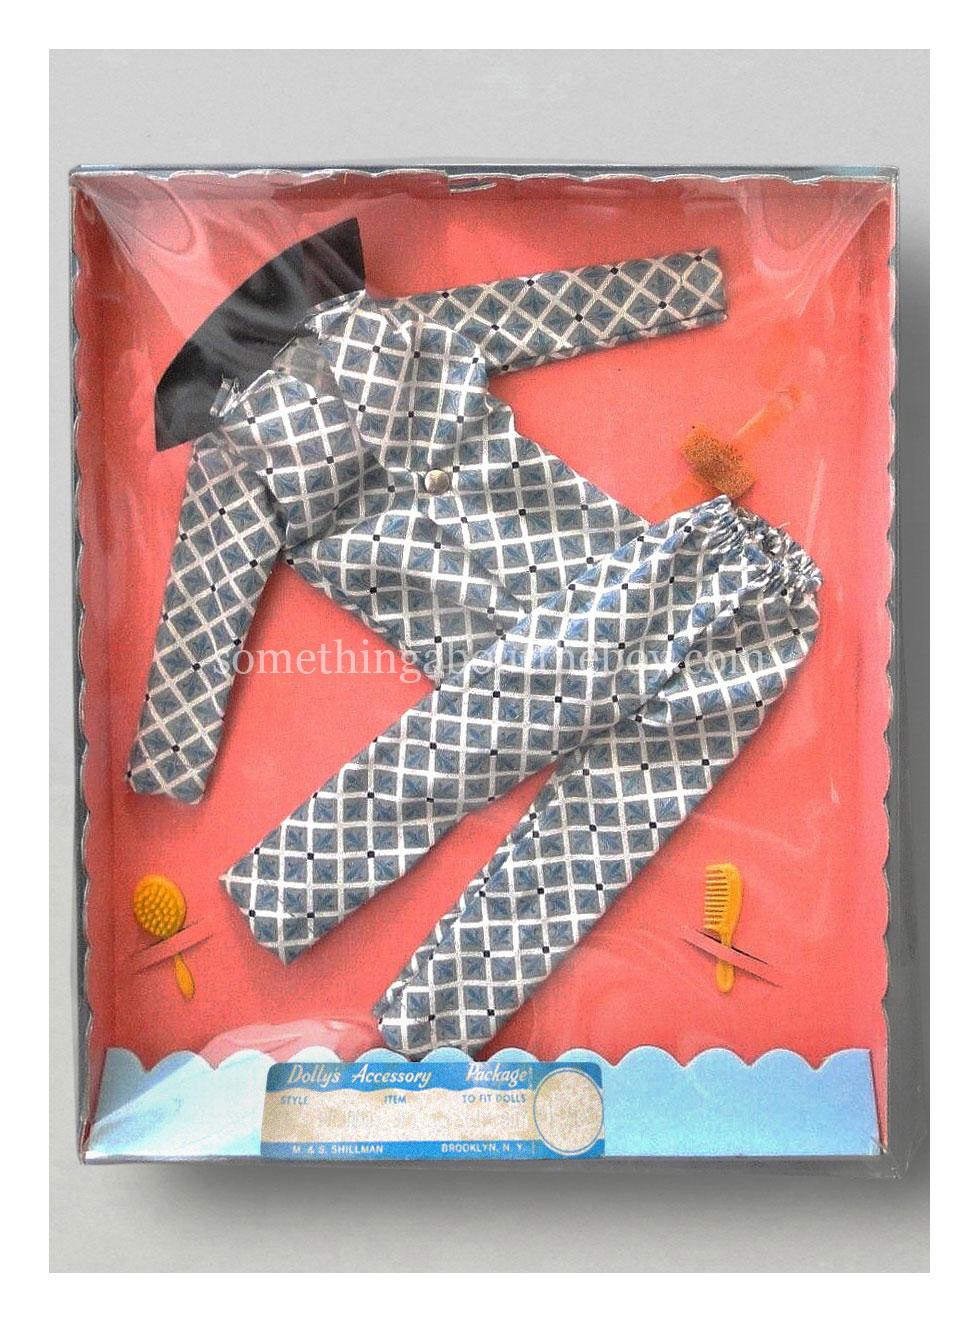 K1 Pajama Set Dolly's Accessory Package by M&S Shillman